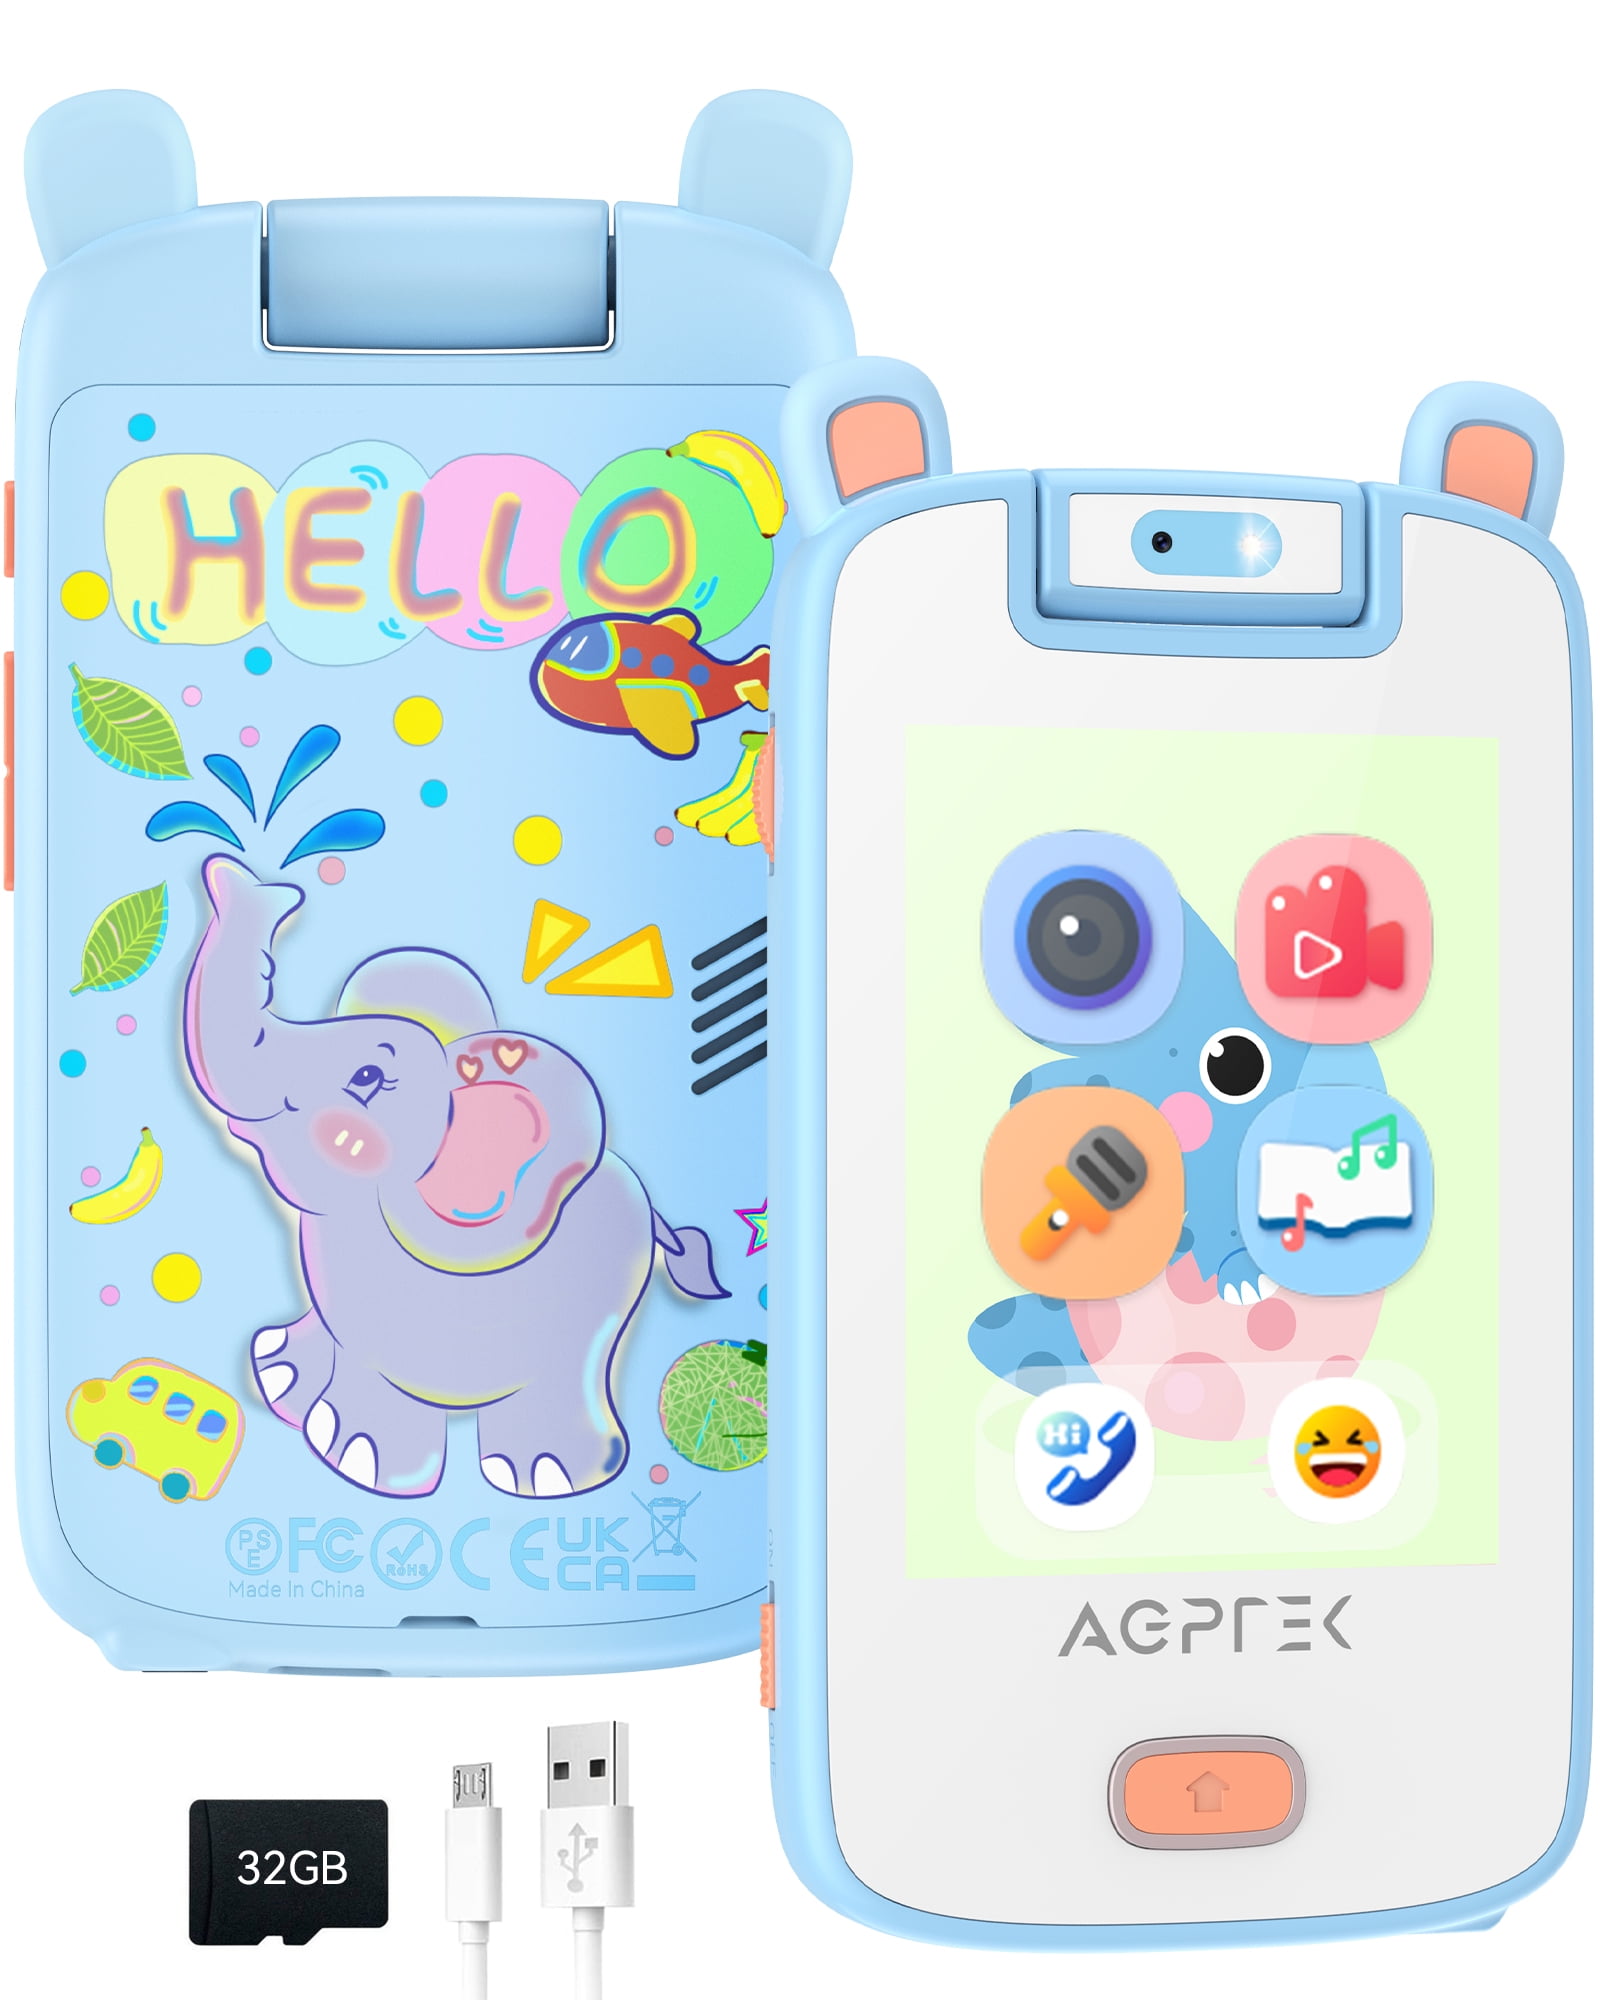 Weloille Kids Smart Phone Unicorns Gifts for Girls 6-8 Year Old